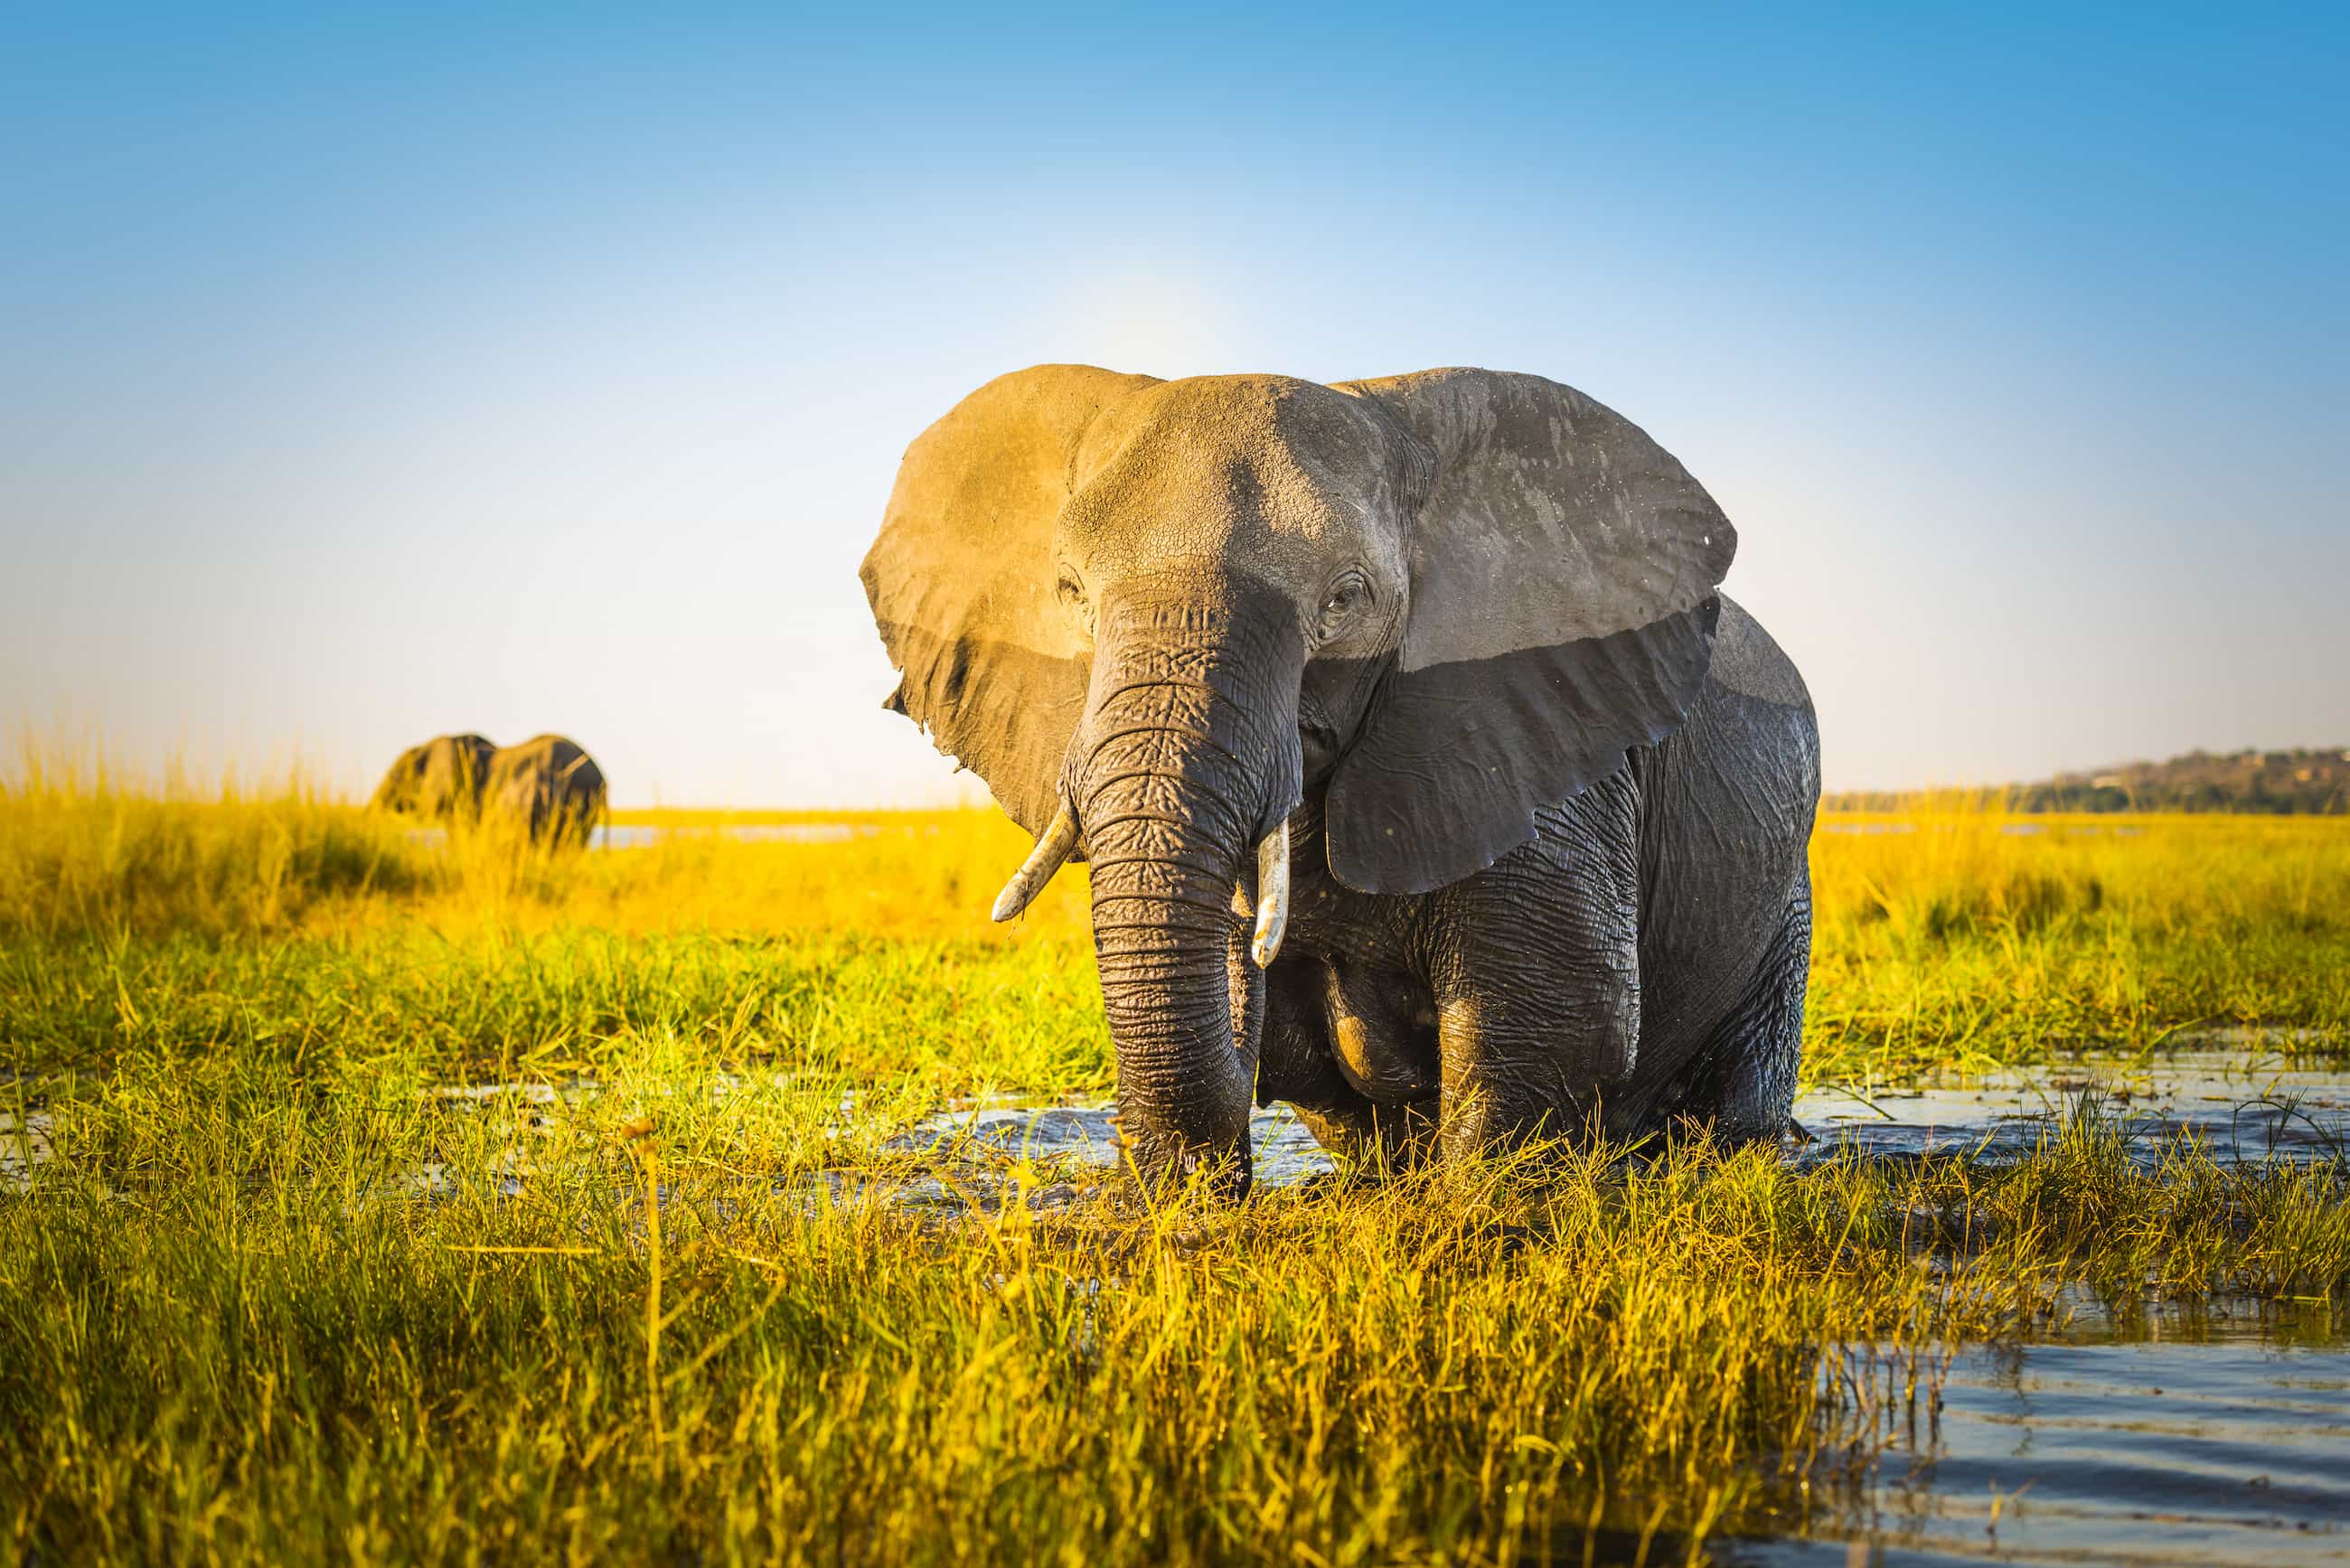 Effective Transformational Change Must Embrace The Entire Elephant — Not Just Its Part